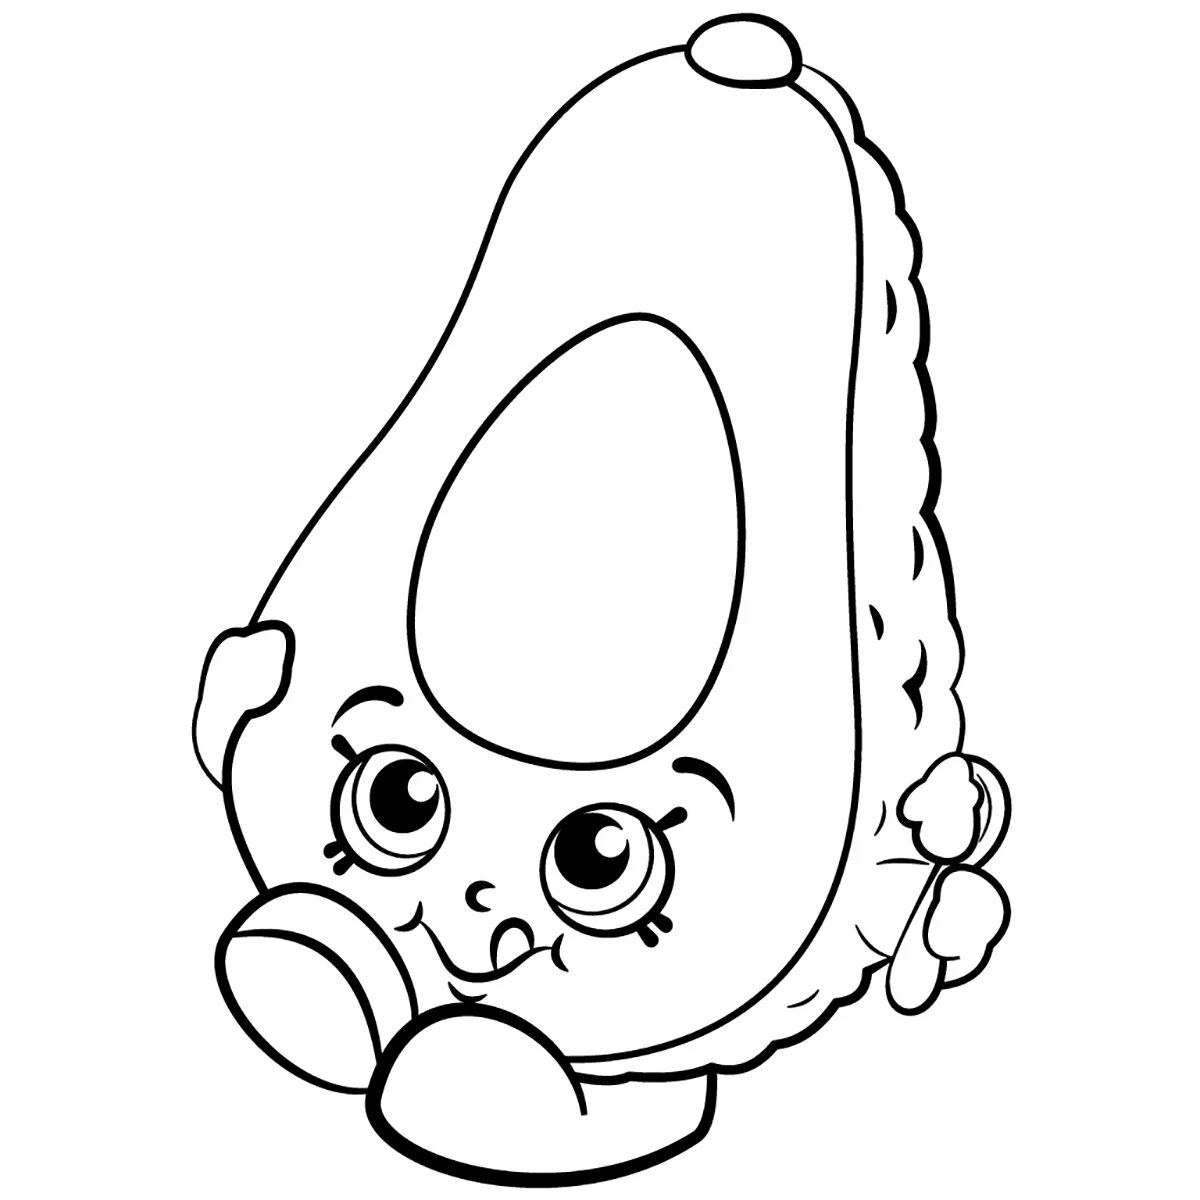 Intricate avocado coloring page for girls